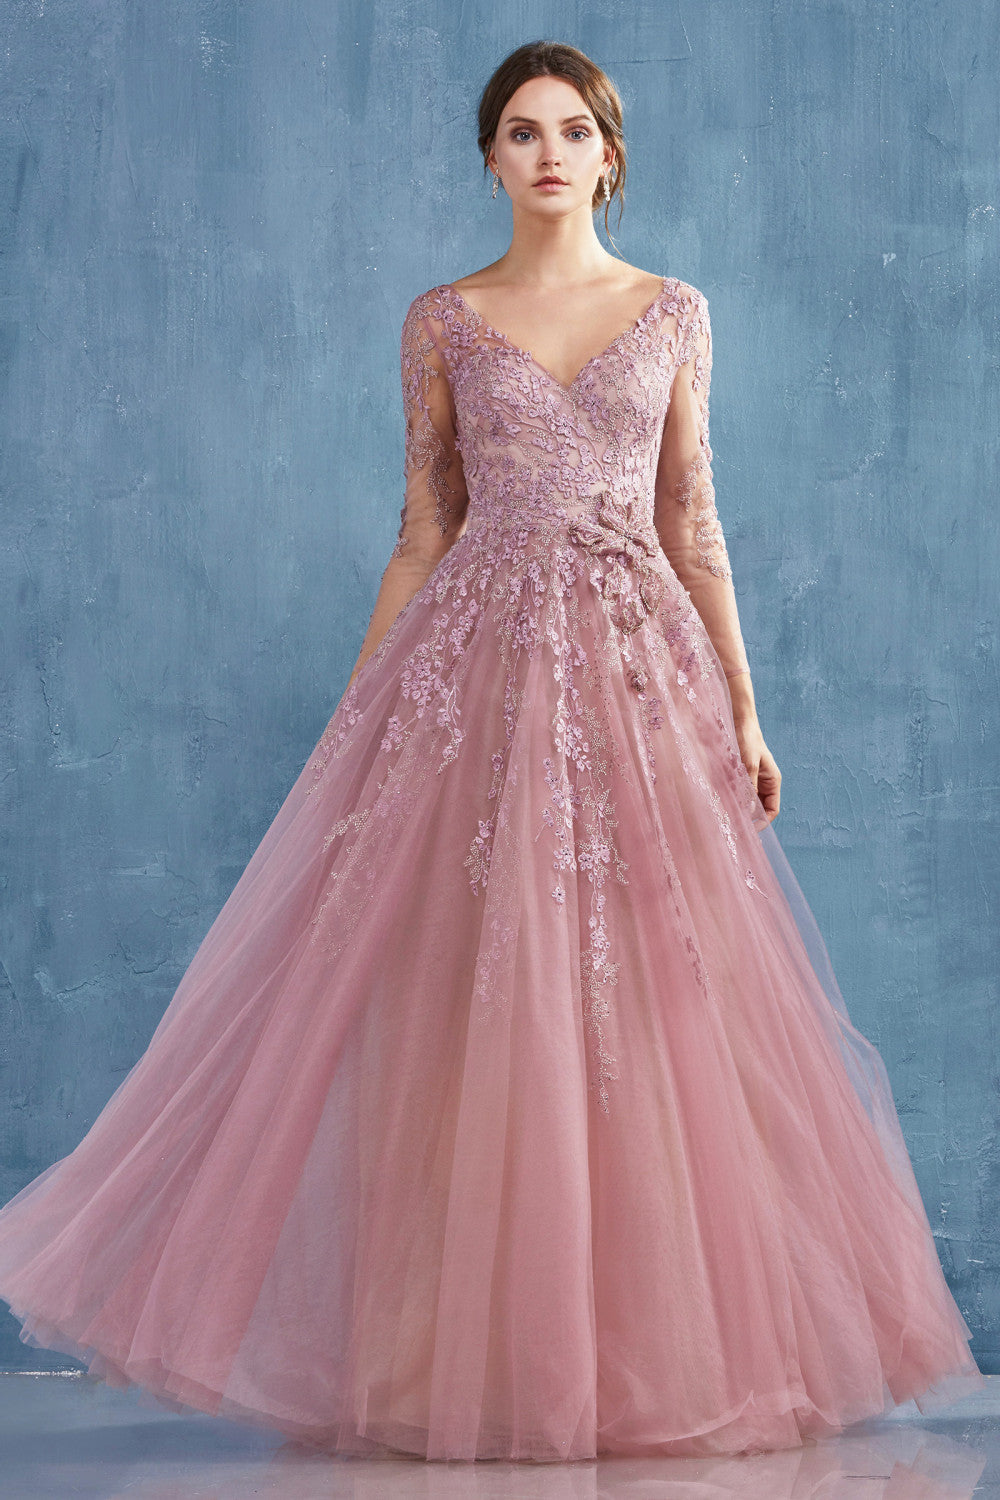 Long Sleeve Floral Applique Tulle A-line Princess Gown - Andrea & Leo Couture A0988 - Special Occasion